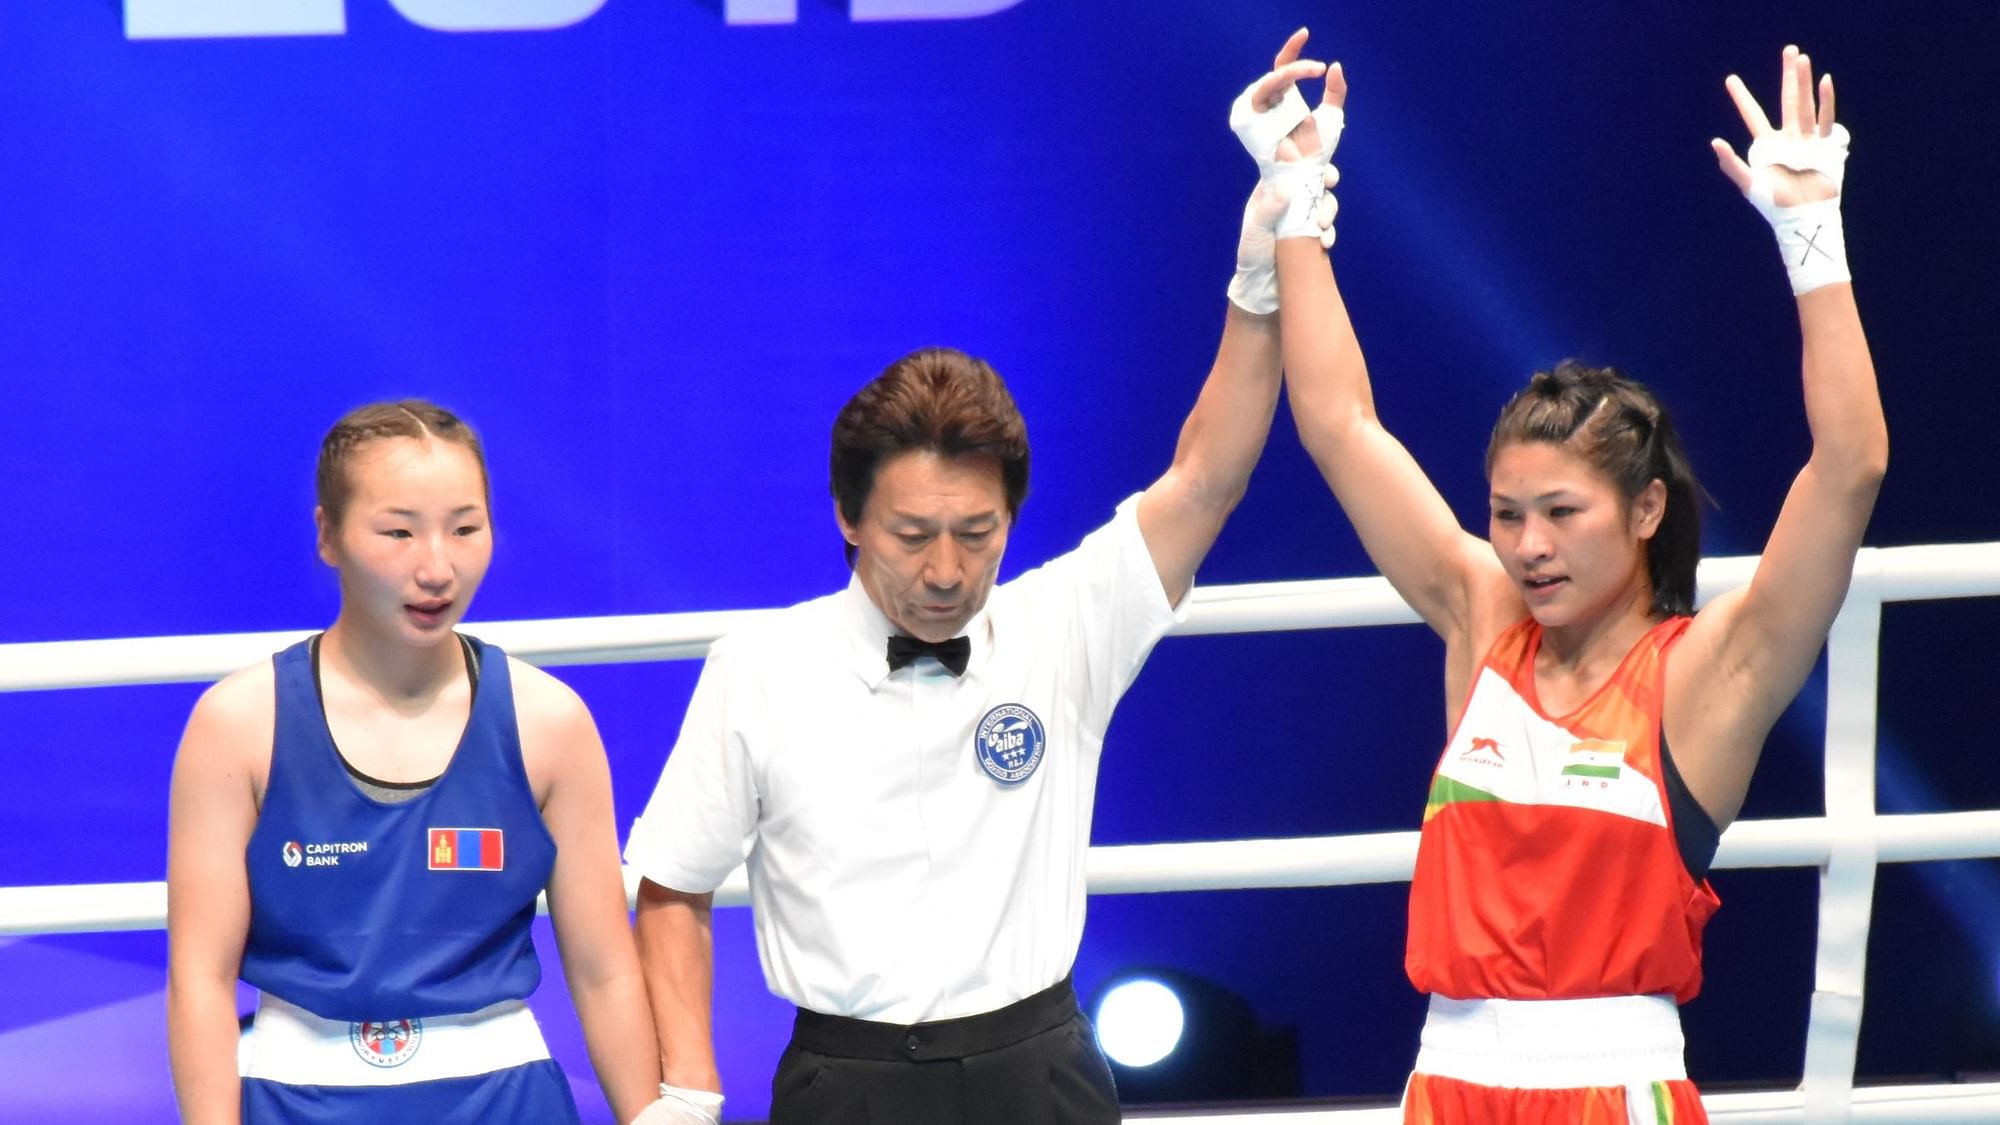 Jamuna Boro (54kg) gave a flying start to India’s campaign in the World Women’s Boxing Championships.